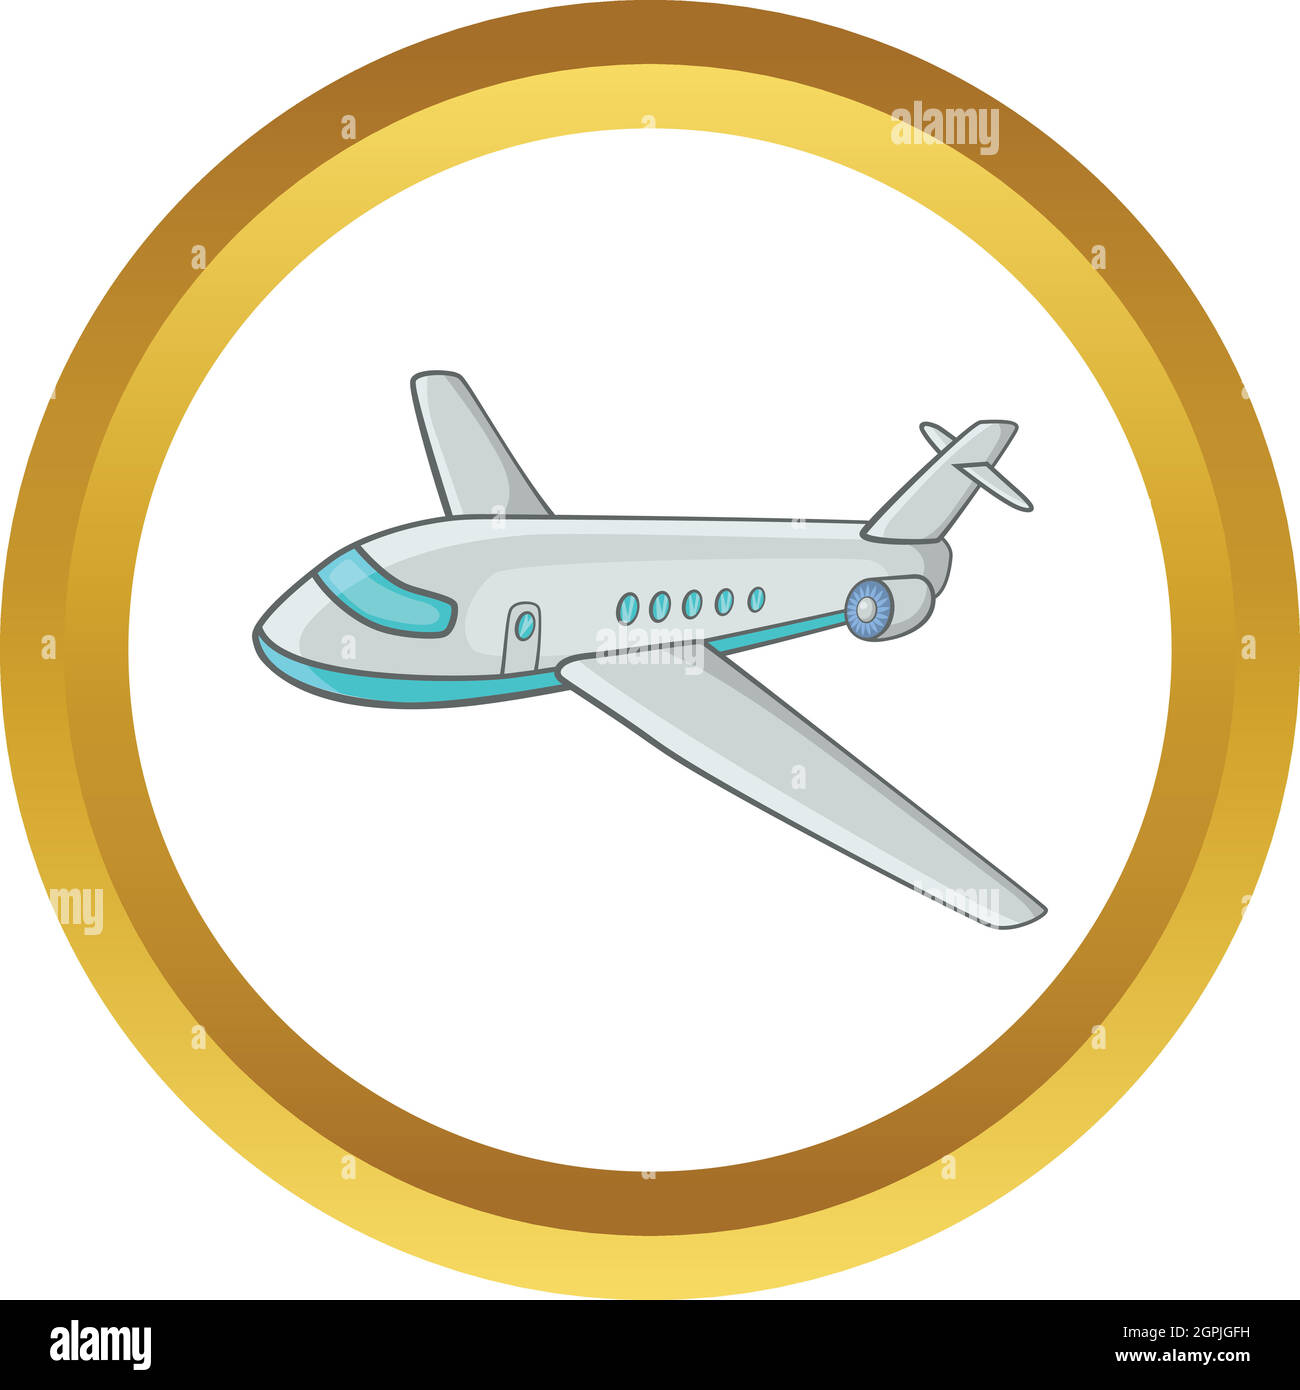 Passenger airliner vector icon Stock Vector